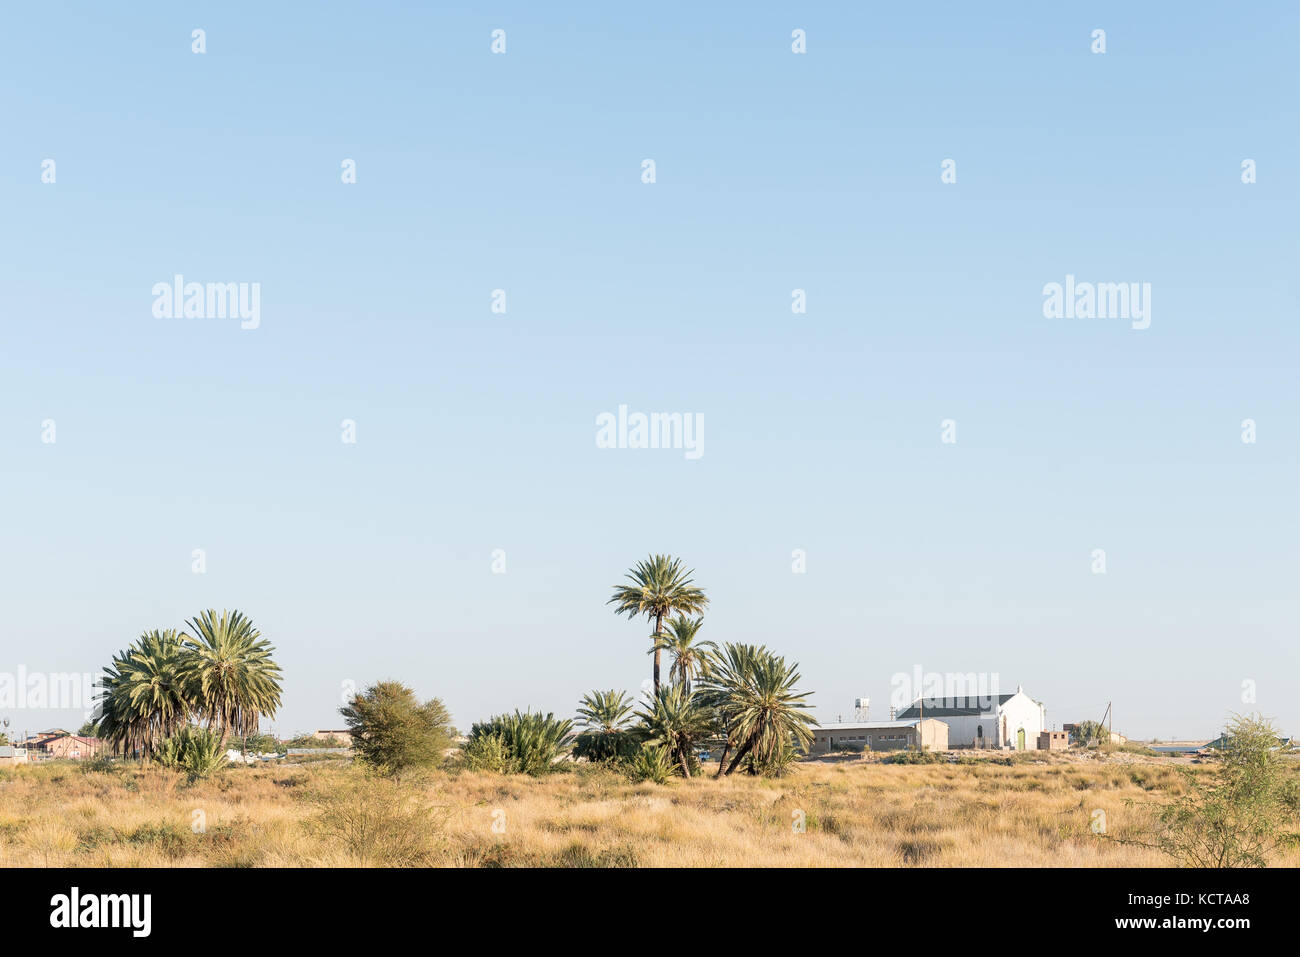 A view of Rietfontein, a small town in the Northern Cape Province of South Africa on the border with Namibia. A fountain is between the palm trees Stock Photo